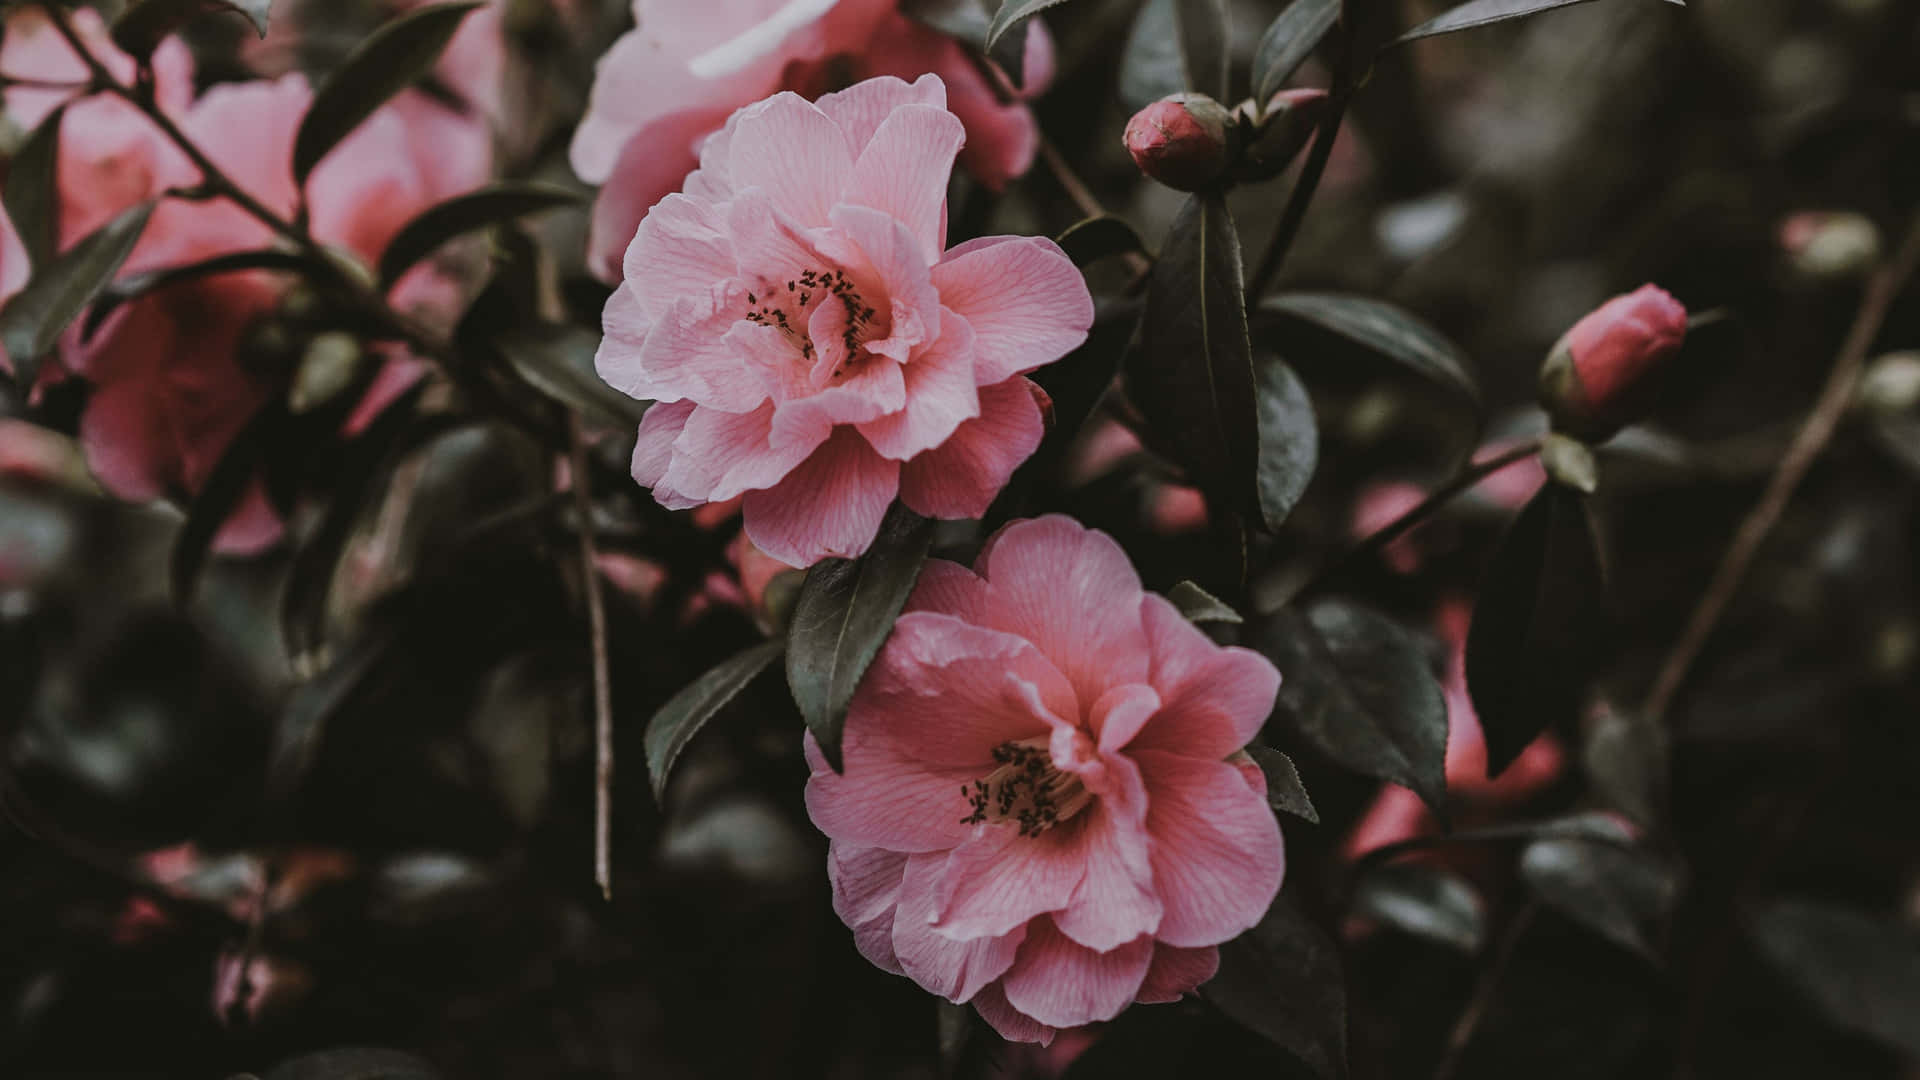 Pink Flowers In A Garden With Dark Leaves Wallpaper